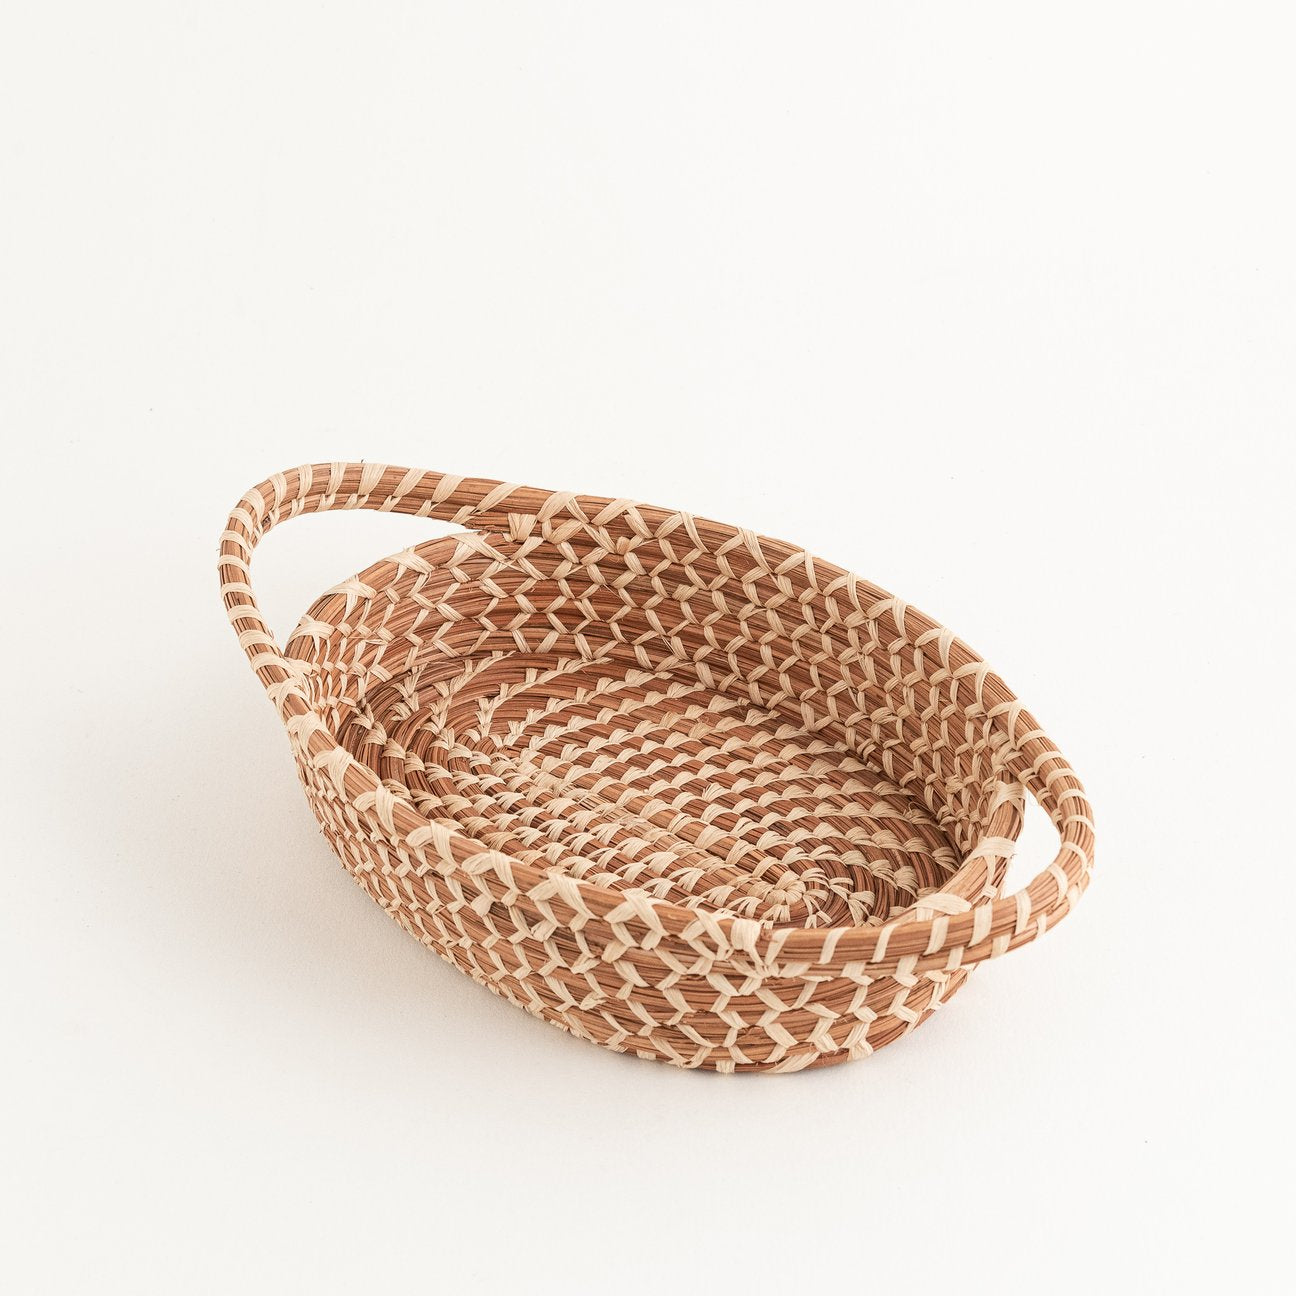 Pine Needle Baskets, by Mayan Hands